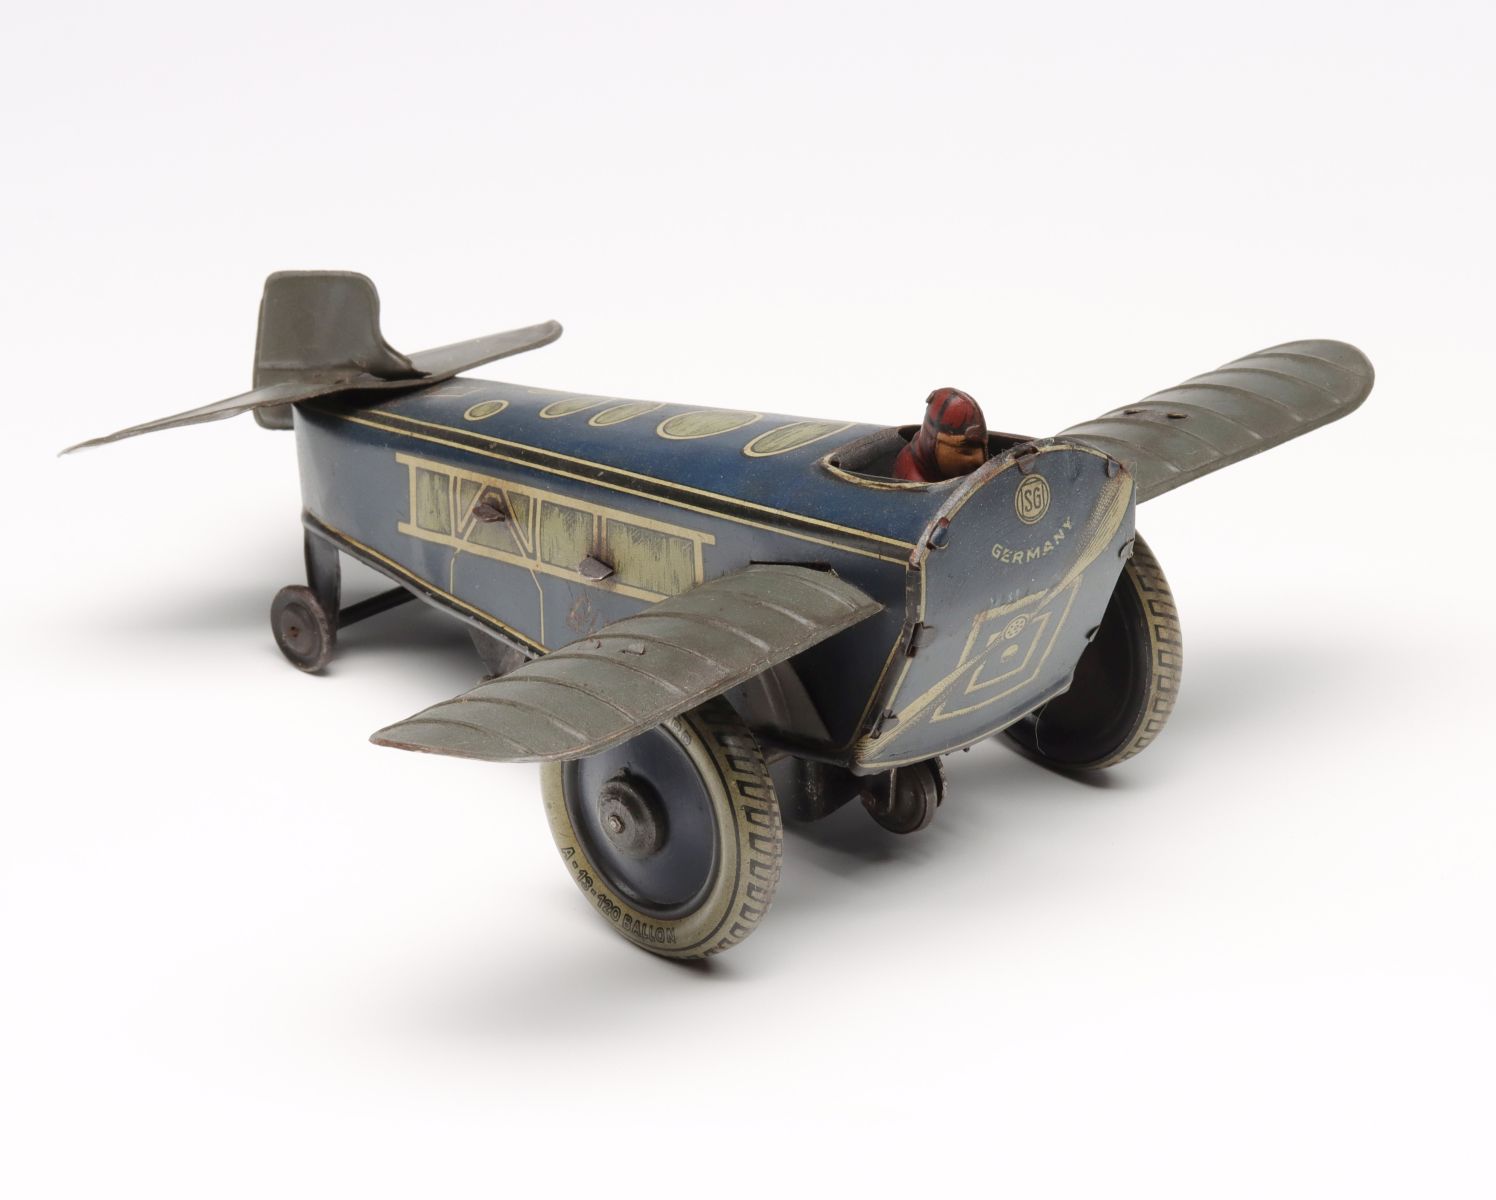 A GUNTHERMAN SG TIN LITHO WIND-UP ROLLOVER PLANE